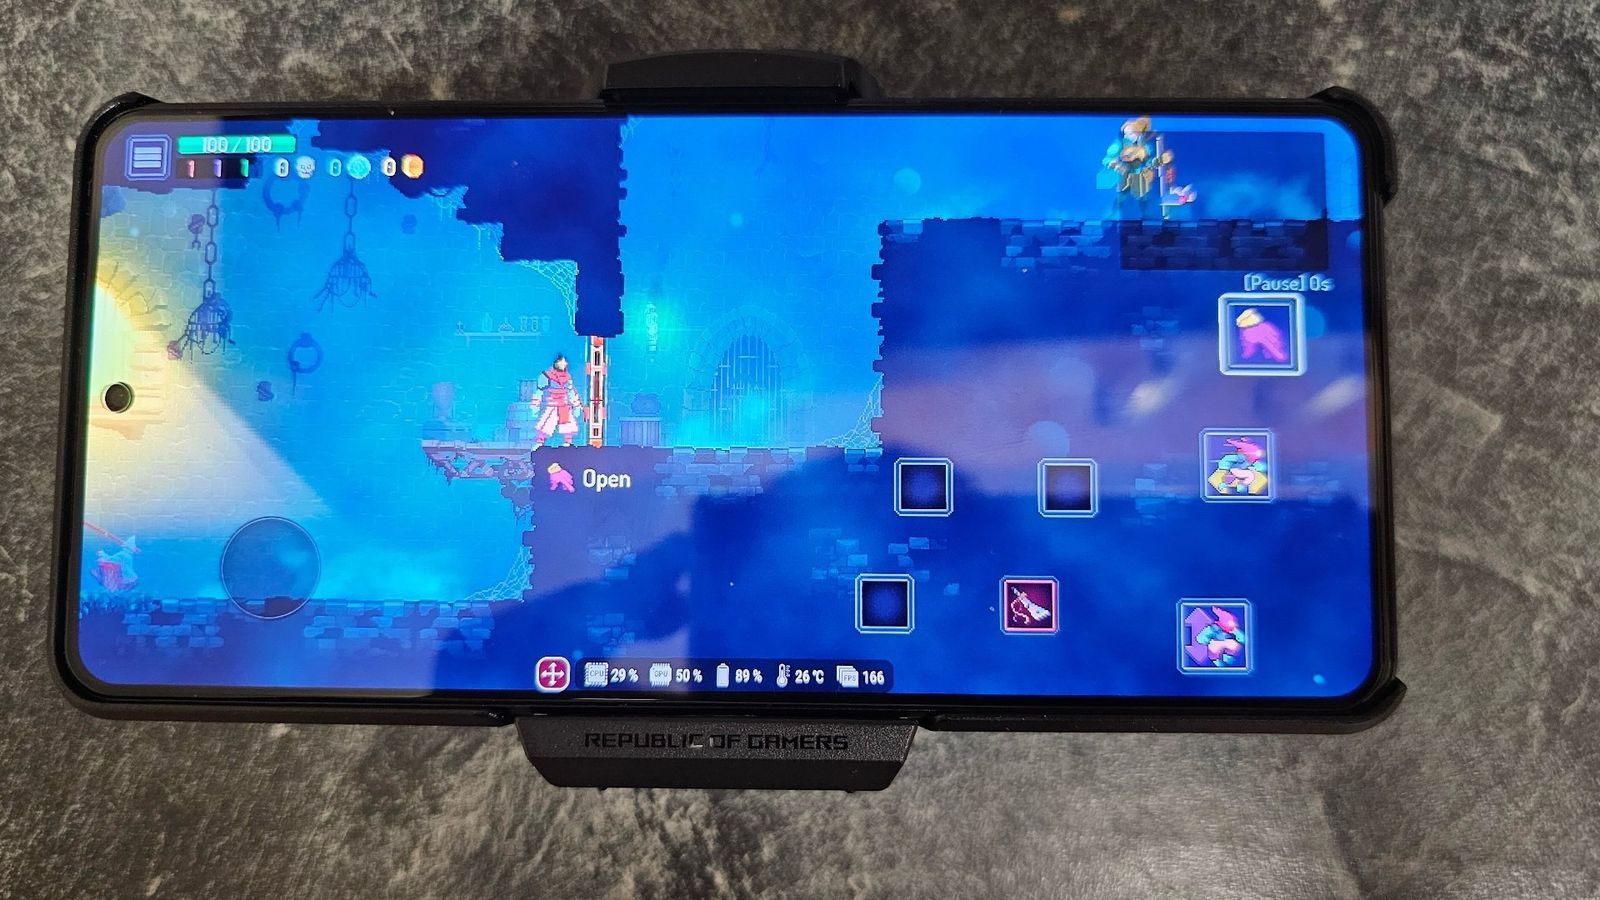 ASUS ROG Phone 8 Pro with Dead Cells playing on the screen